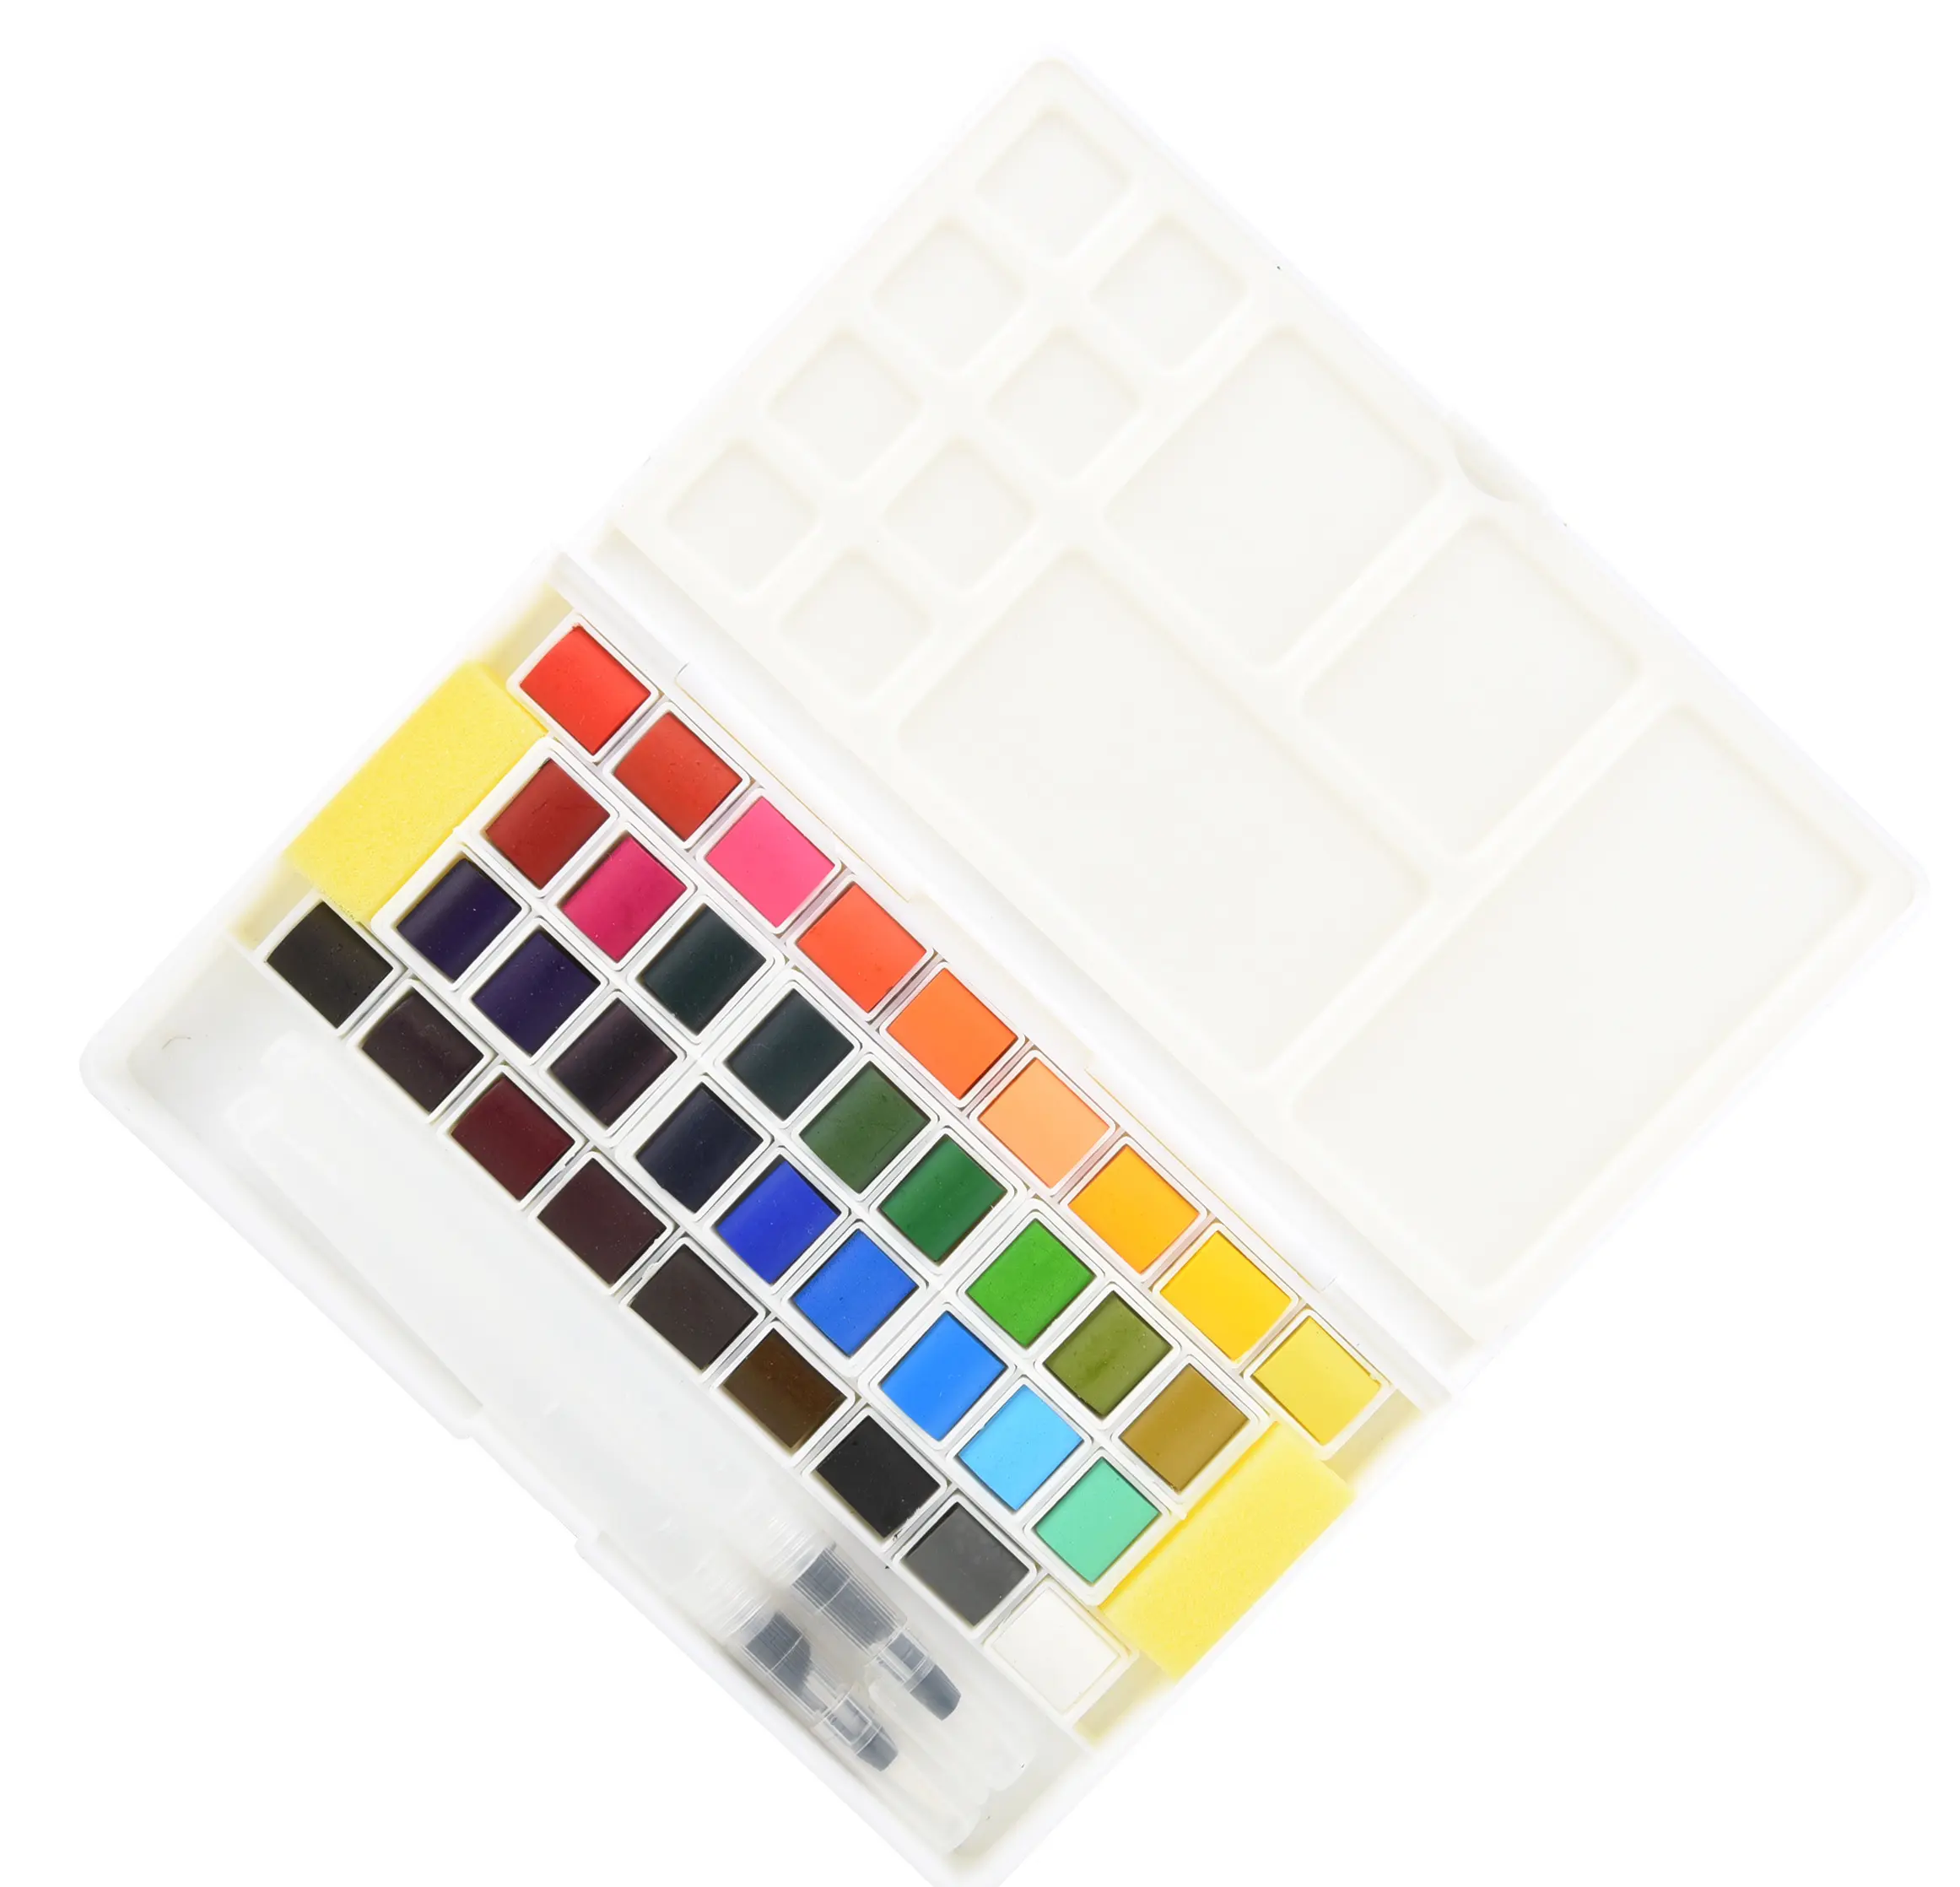 Professional grade quick drying solid water color colour drawing paint set for painting